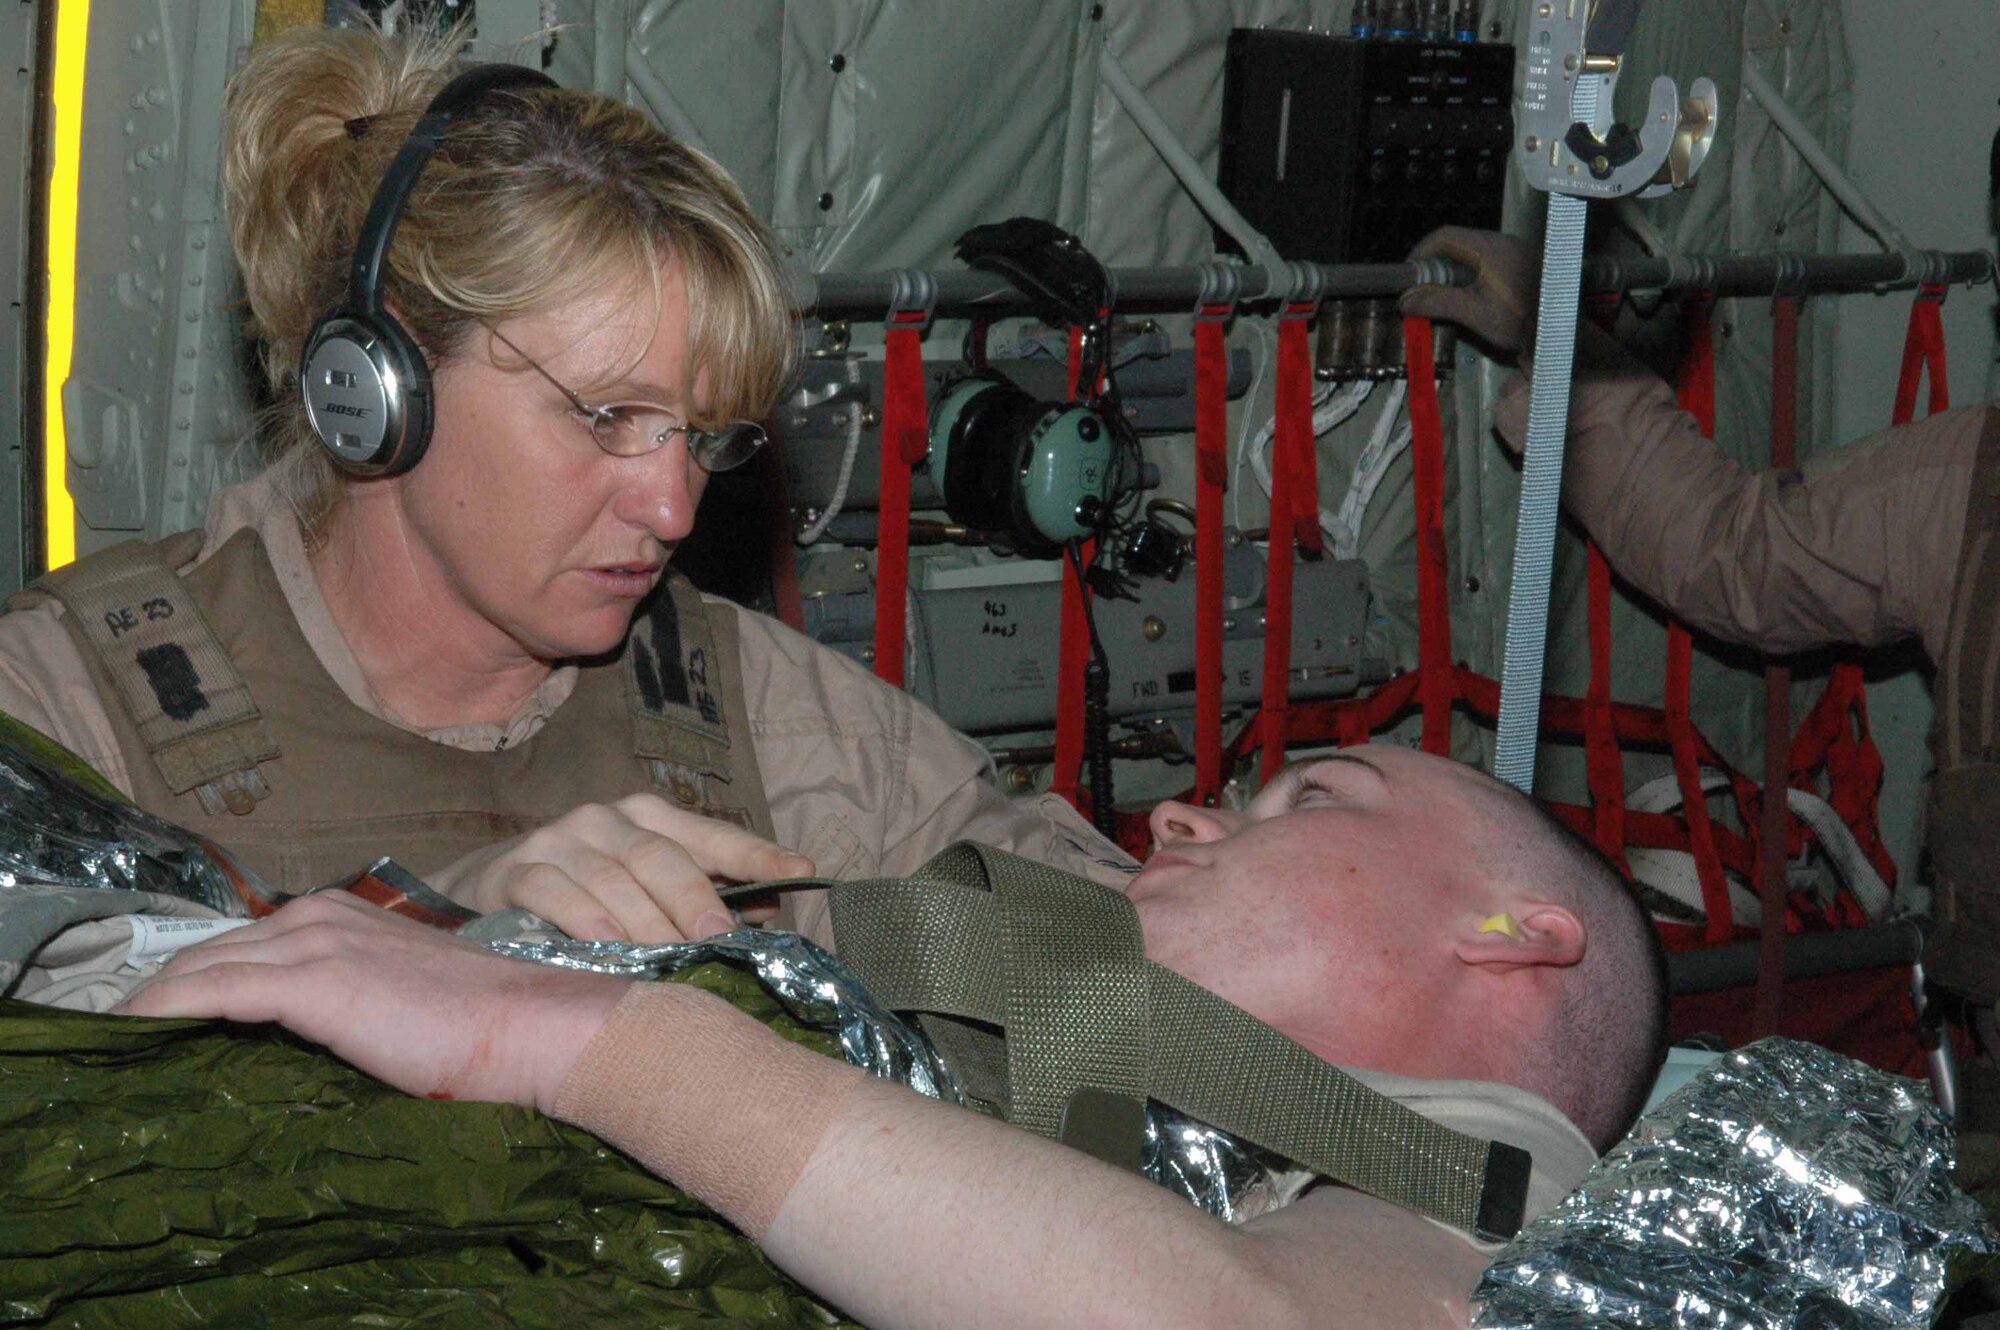 SOUTHWEST ASIA -- Capt. Lisa Causey, 379th Expeditionary Aeromedical Evacuation Squadron second flight nurse, cares for a litter patient on board a C-130J April 2. As an Air National Guard member deployed from the 183rd Aeromedical Evacuation Squadron in Jackson, Miss., she, along with four other medical specialists and a team of pilots and loadmasters, made a 15-hour flight from here to four cities in Iraq and one air base in the Middle East. They airlifted 19 patients, 16 of whom were ambulatory, to the Persian Gulf, where most of the patients were transferred to a C-17 headed for Germany. (U.S. Air Force photo by Senior Airman Carolyn Viss)